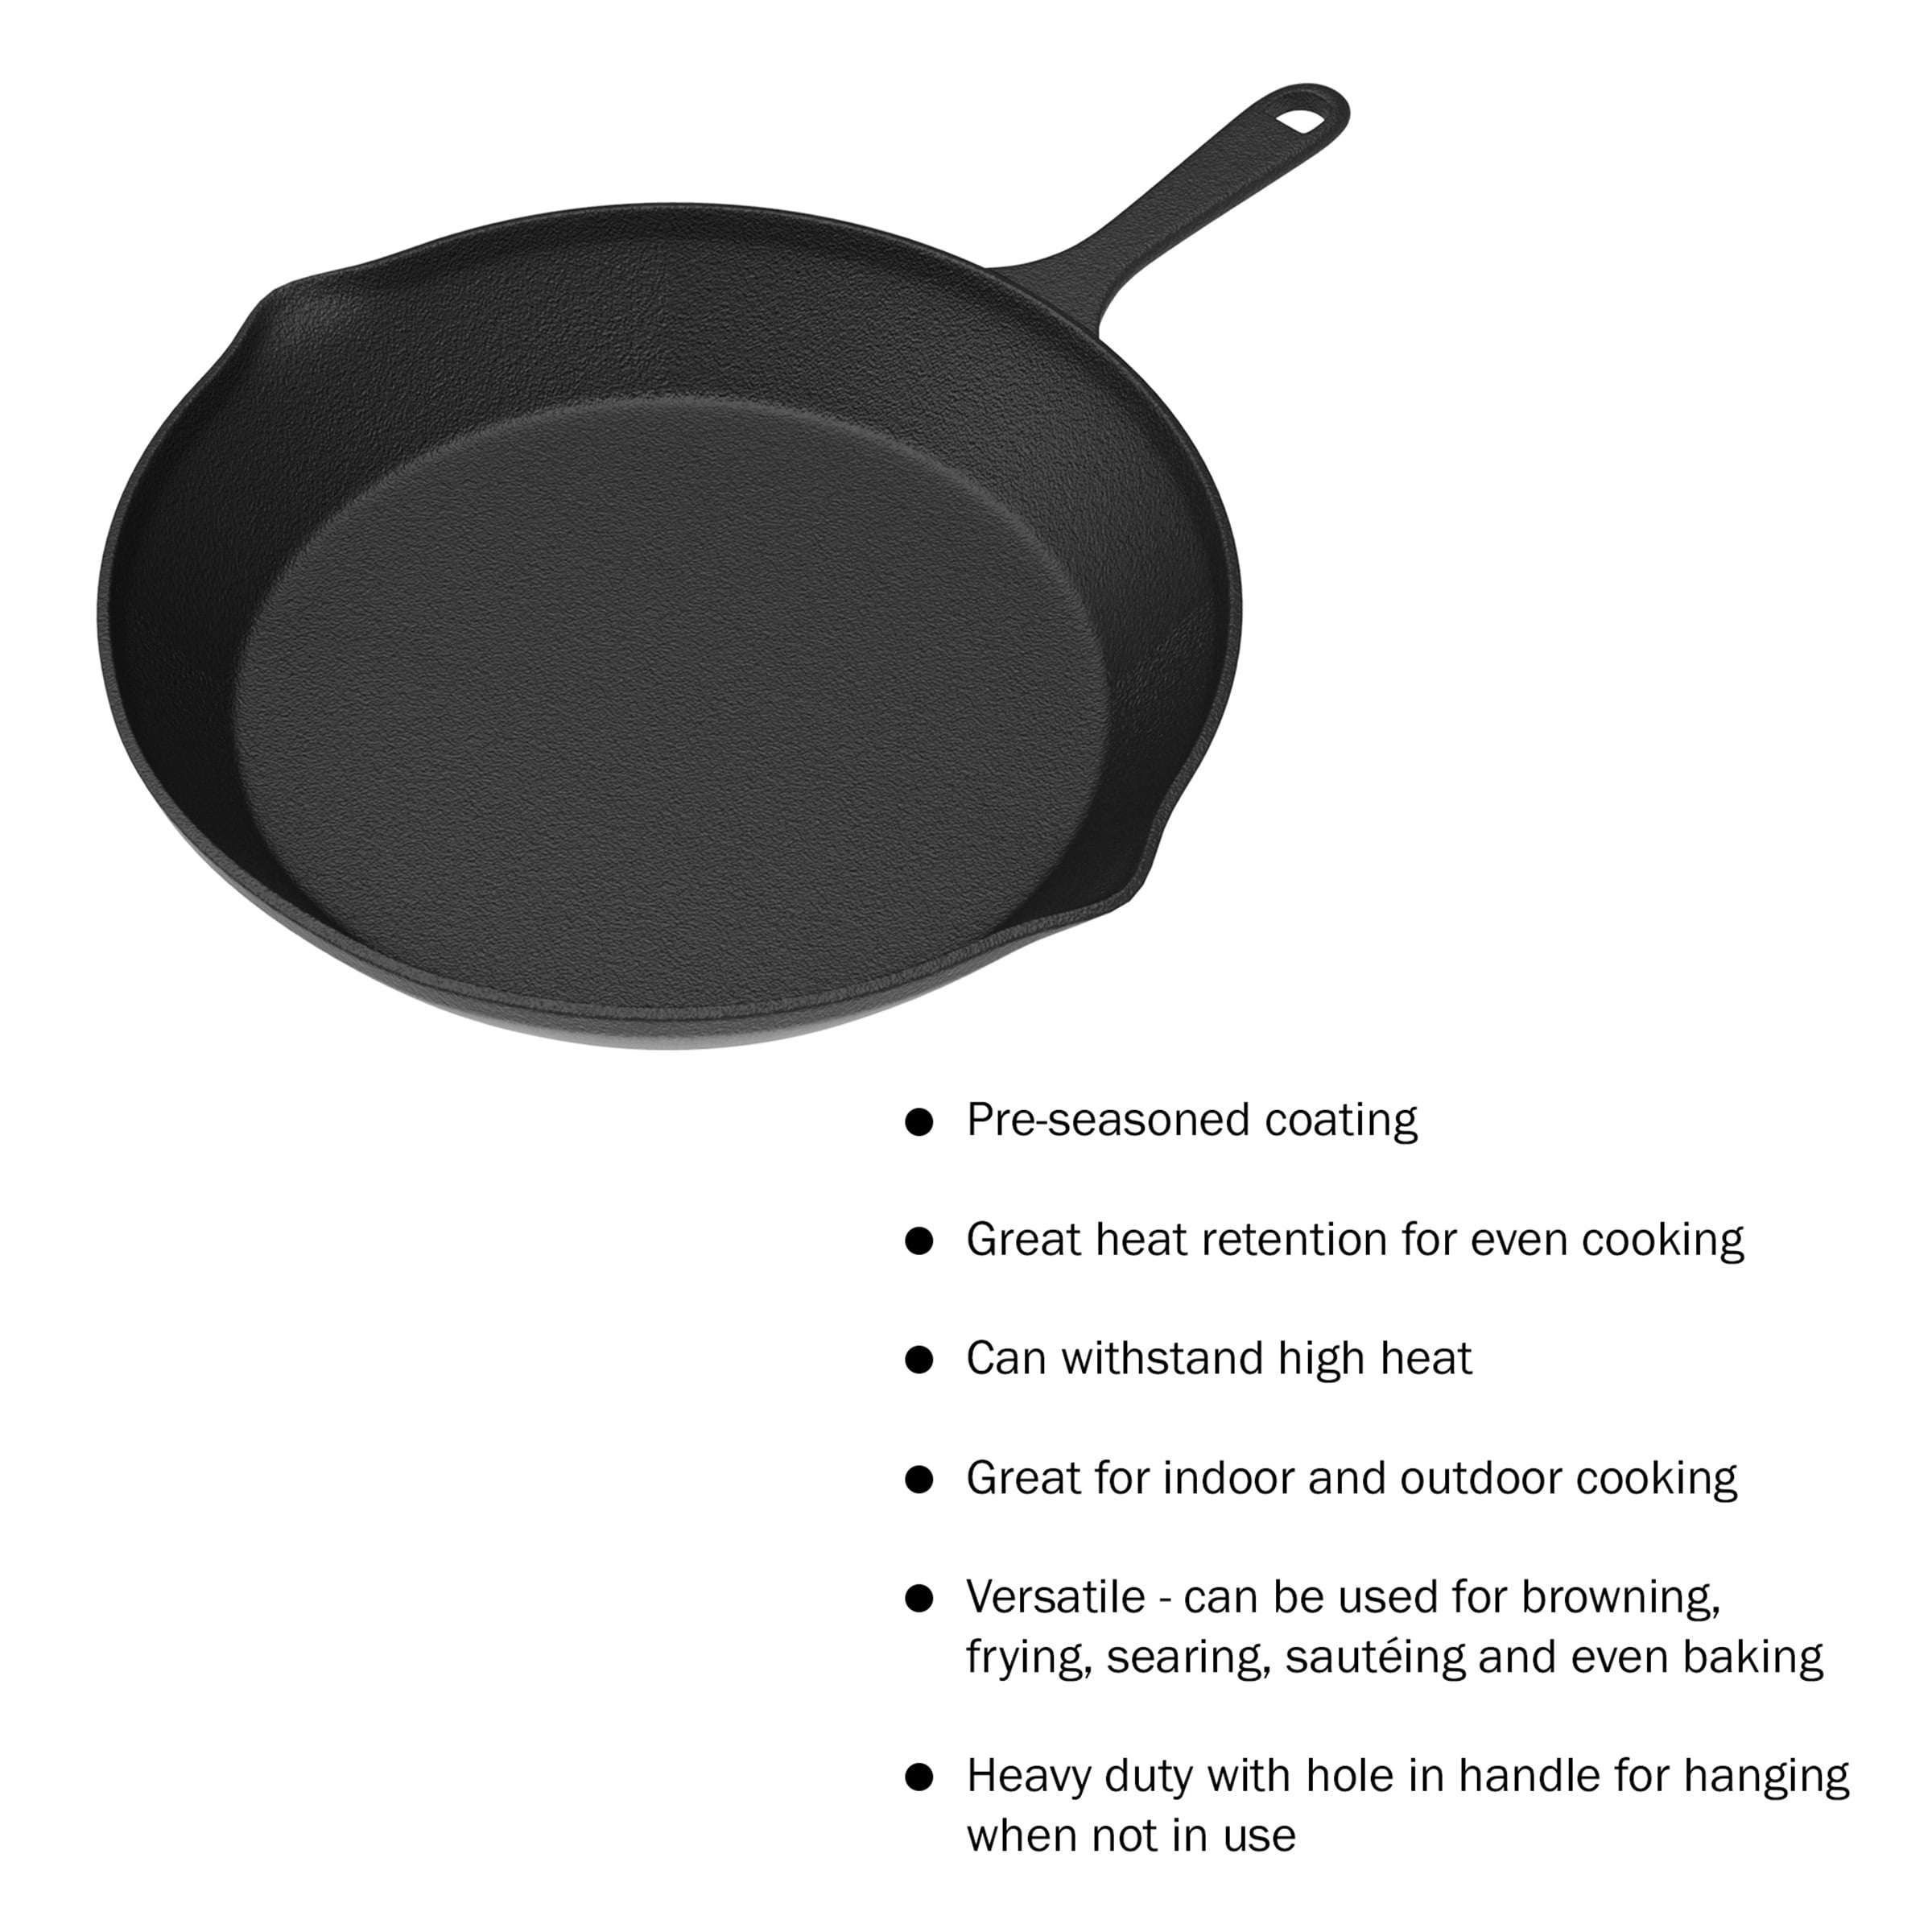 Utopia Kitchen Saute fry pan - Pre-Seasoned Cast Iron Skillet Set 3-Piece -  Frying Pan 6 Inch, 8 Inch and 10 Inch Cast Iron Set (Black)